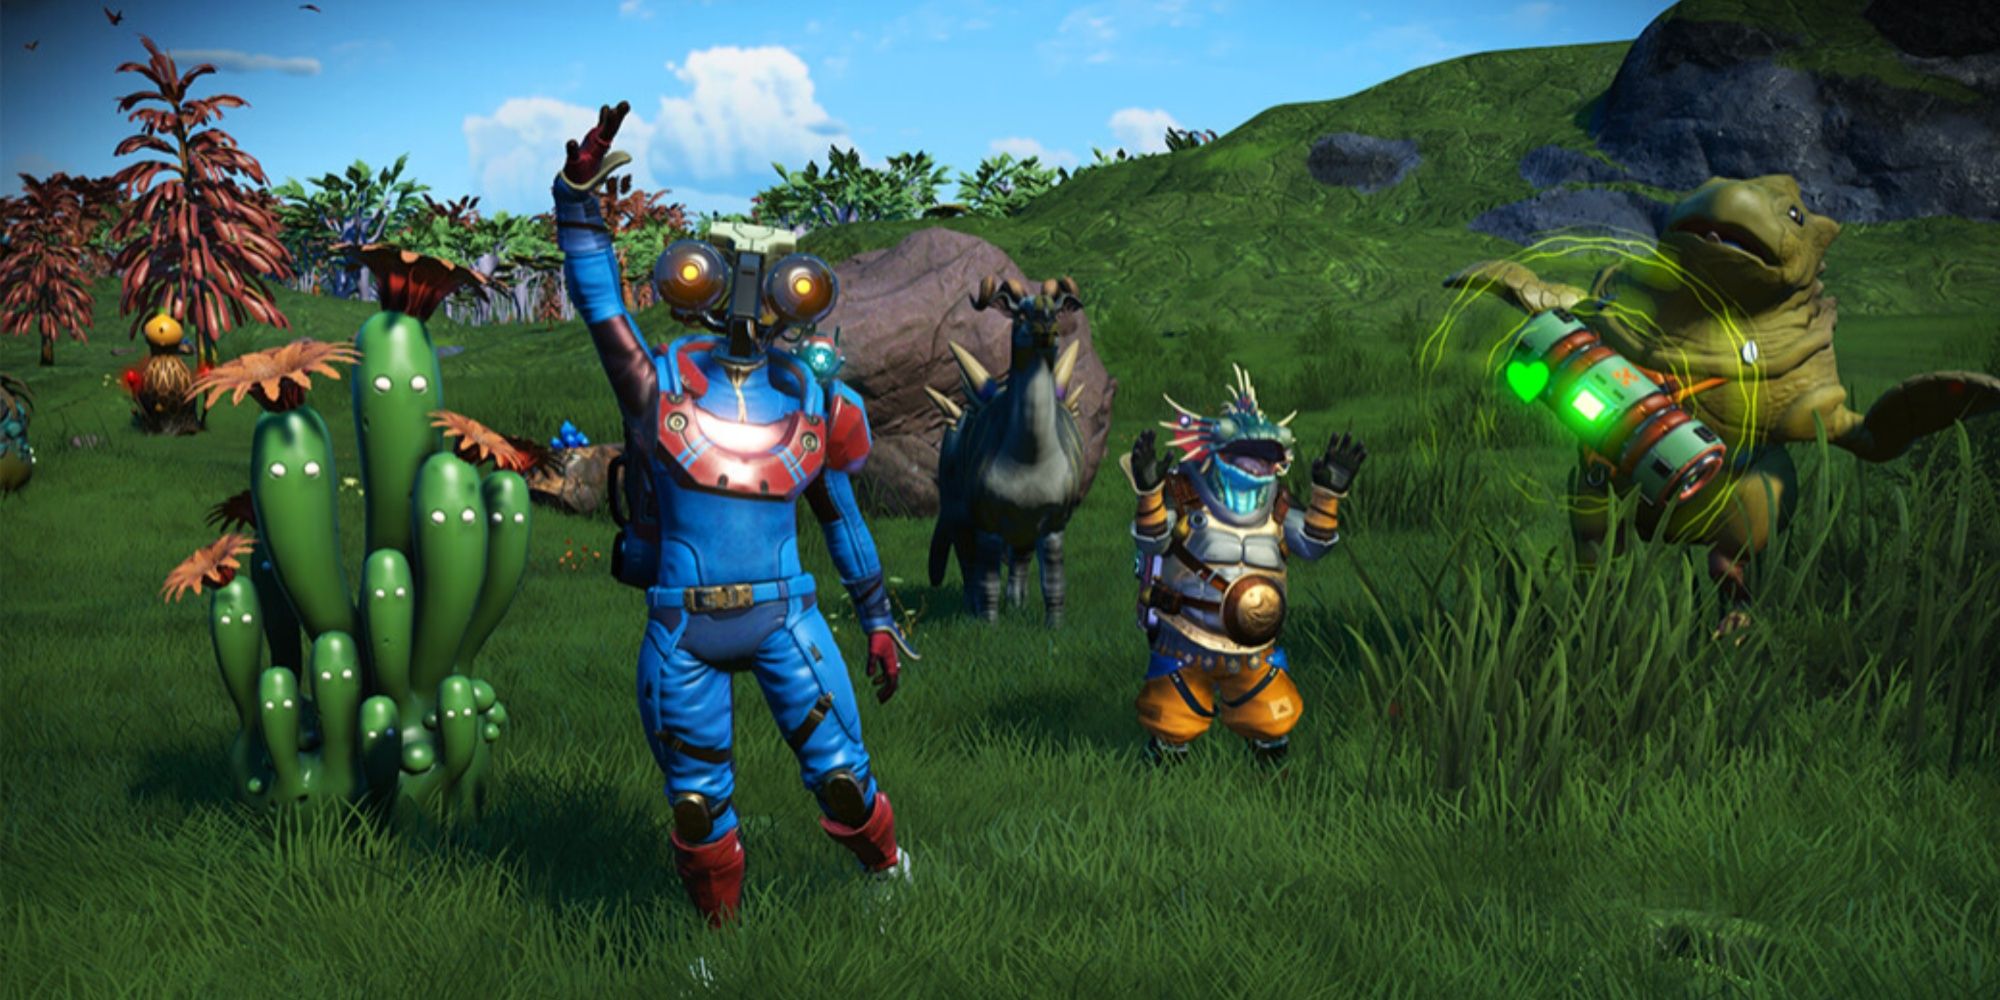 Companions was one of the best expansions in No Man's Sky 